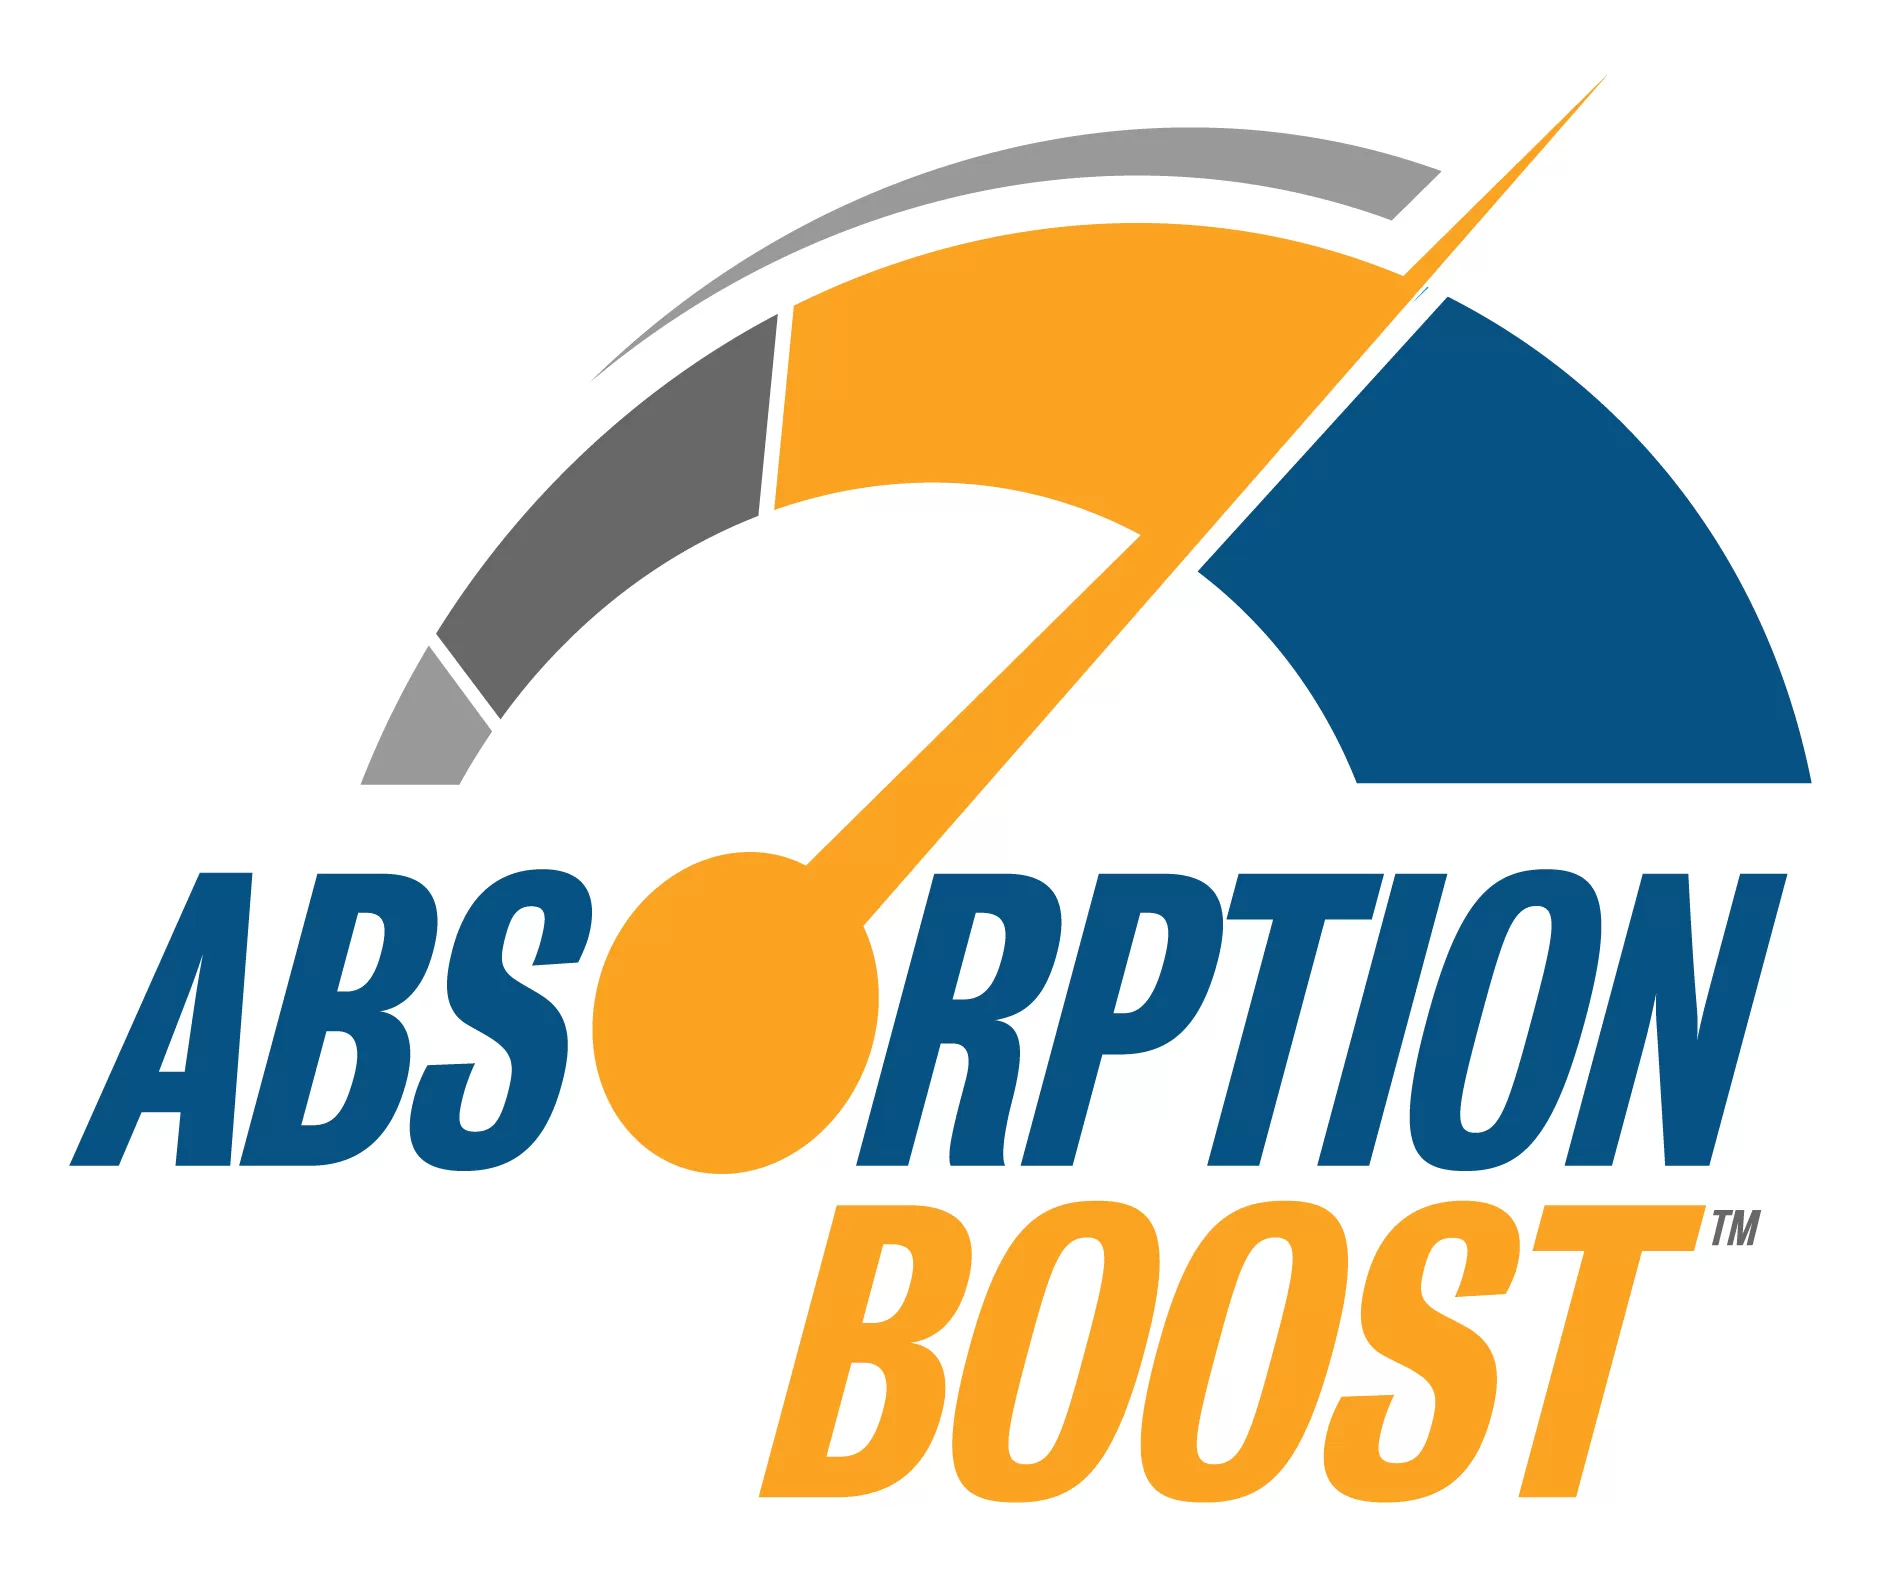 Gray, yellow and blue "Absorption Boost" logo